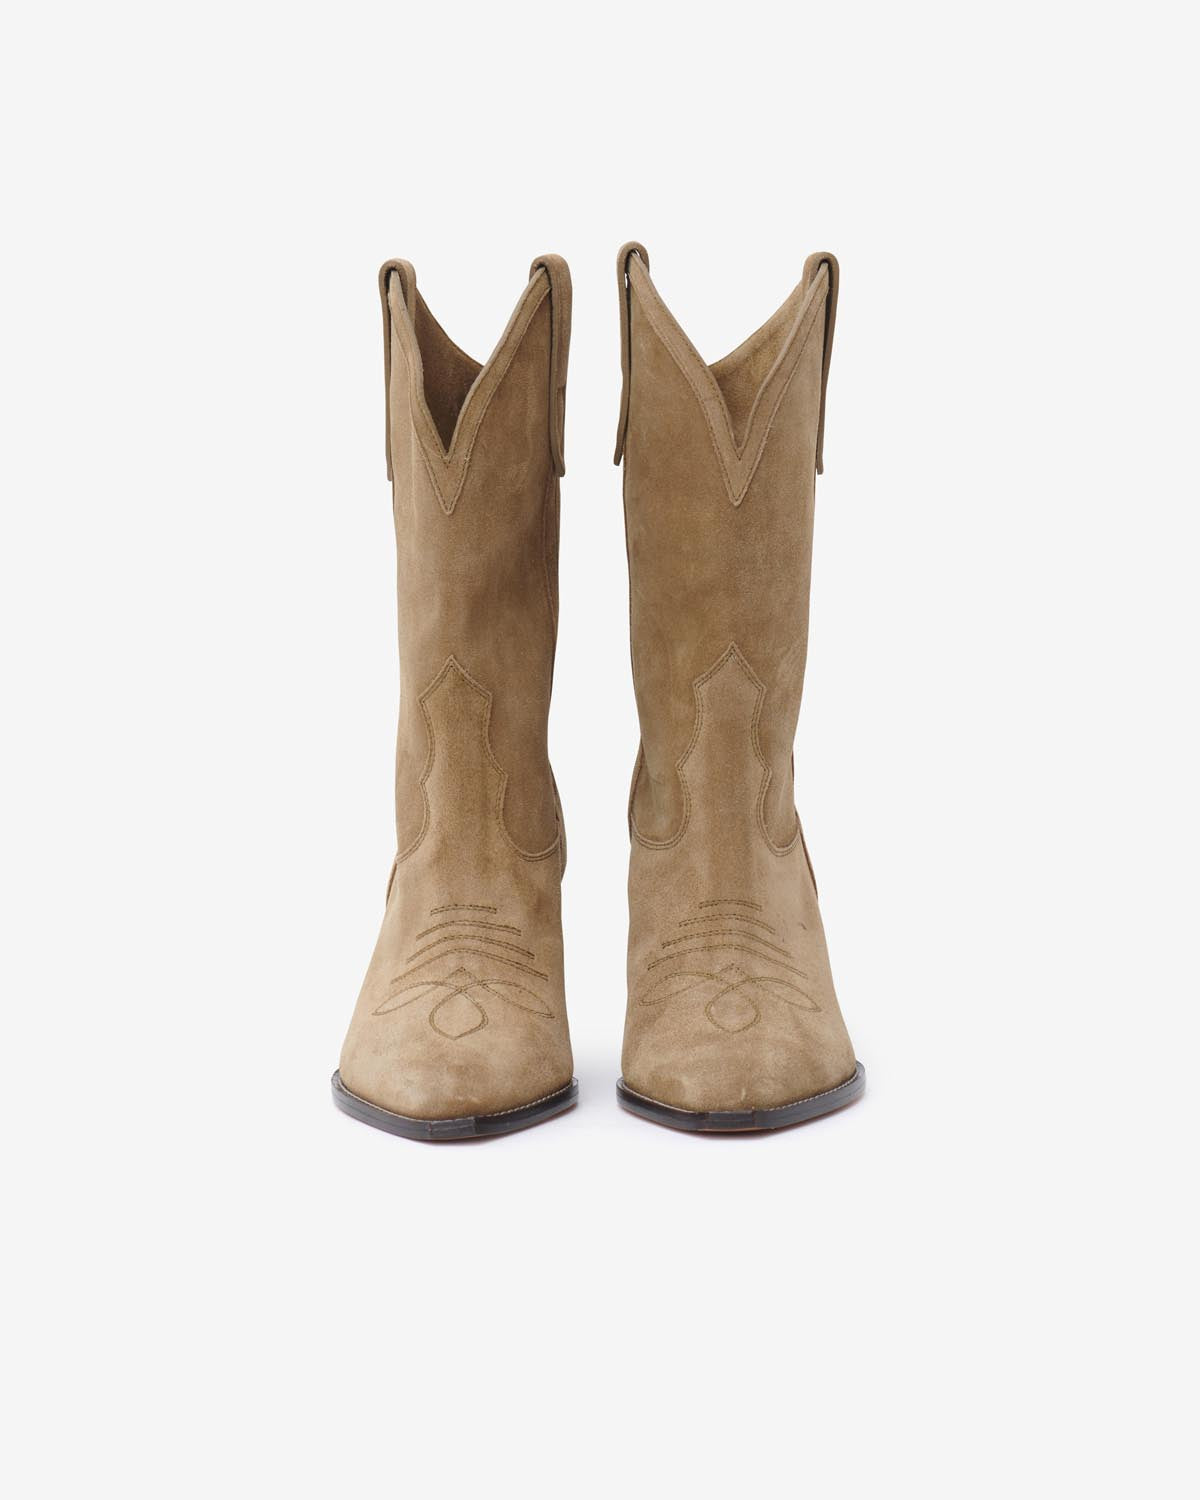 Boots luliette Woman Taupe 1